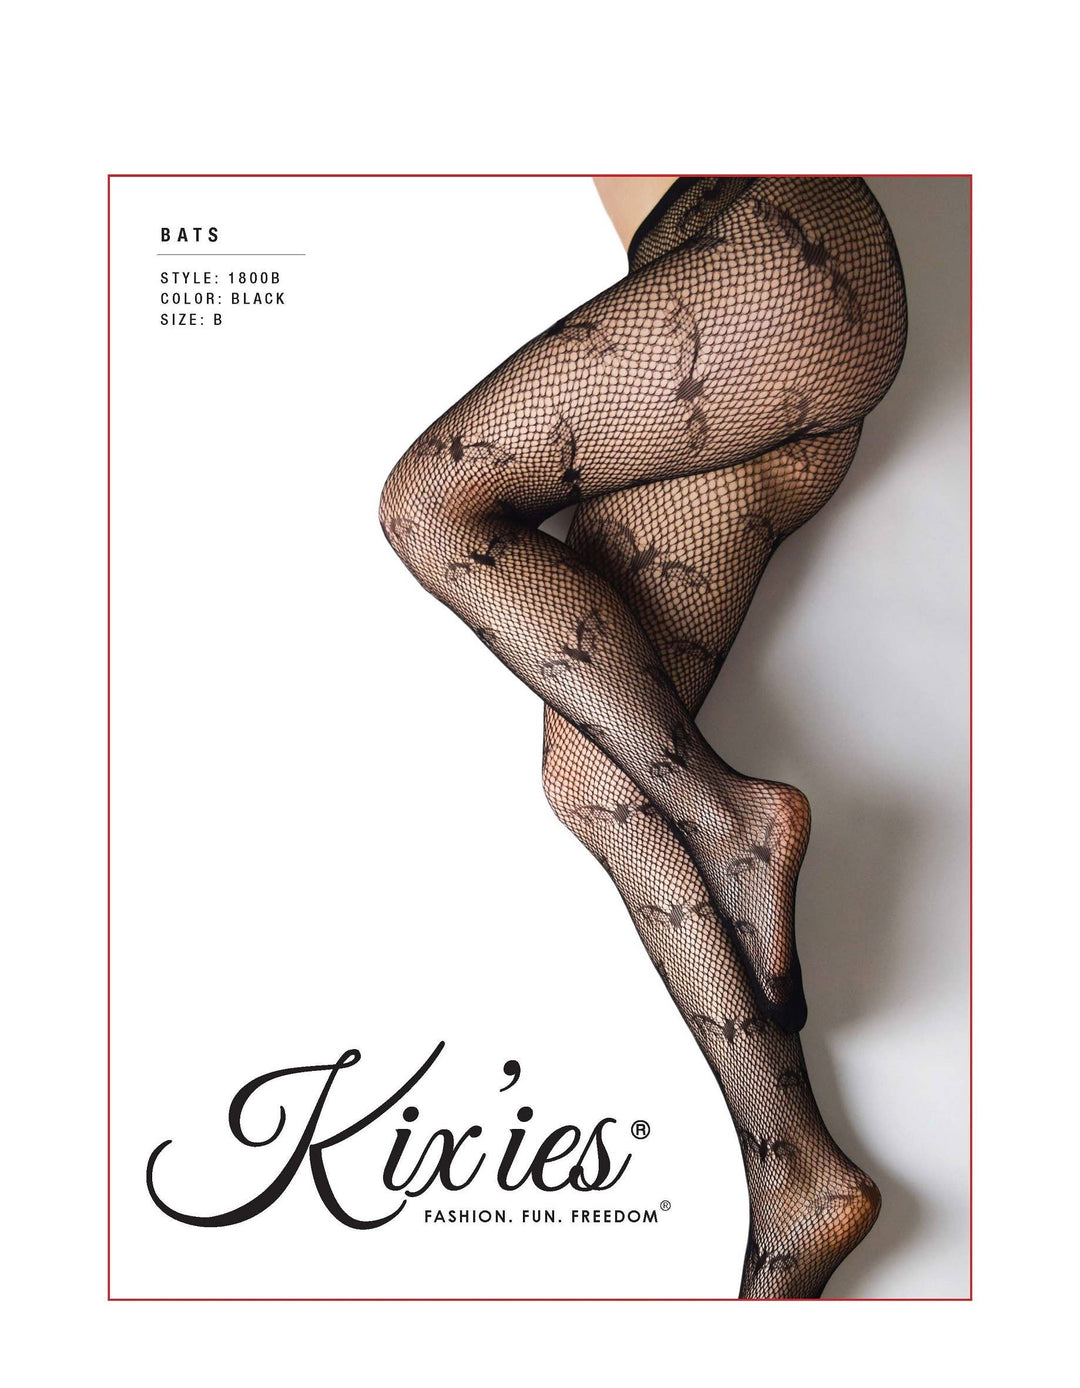 Kix'ies Fishnet Tights, Fishnet Bats-160 Bottoms-Inspired by Justeen-Women's Clothing Boutique in Chicago, Illinois